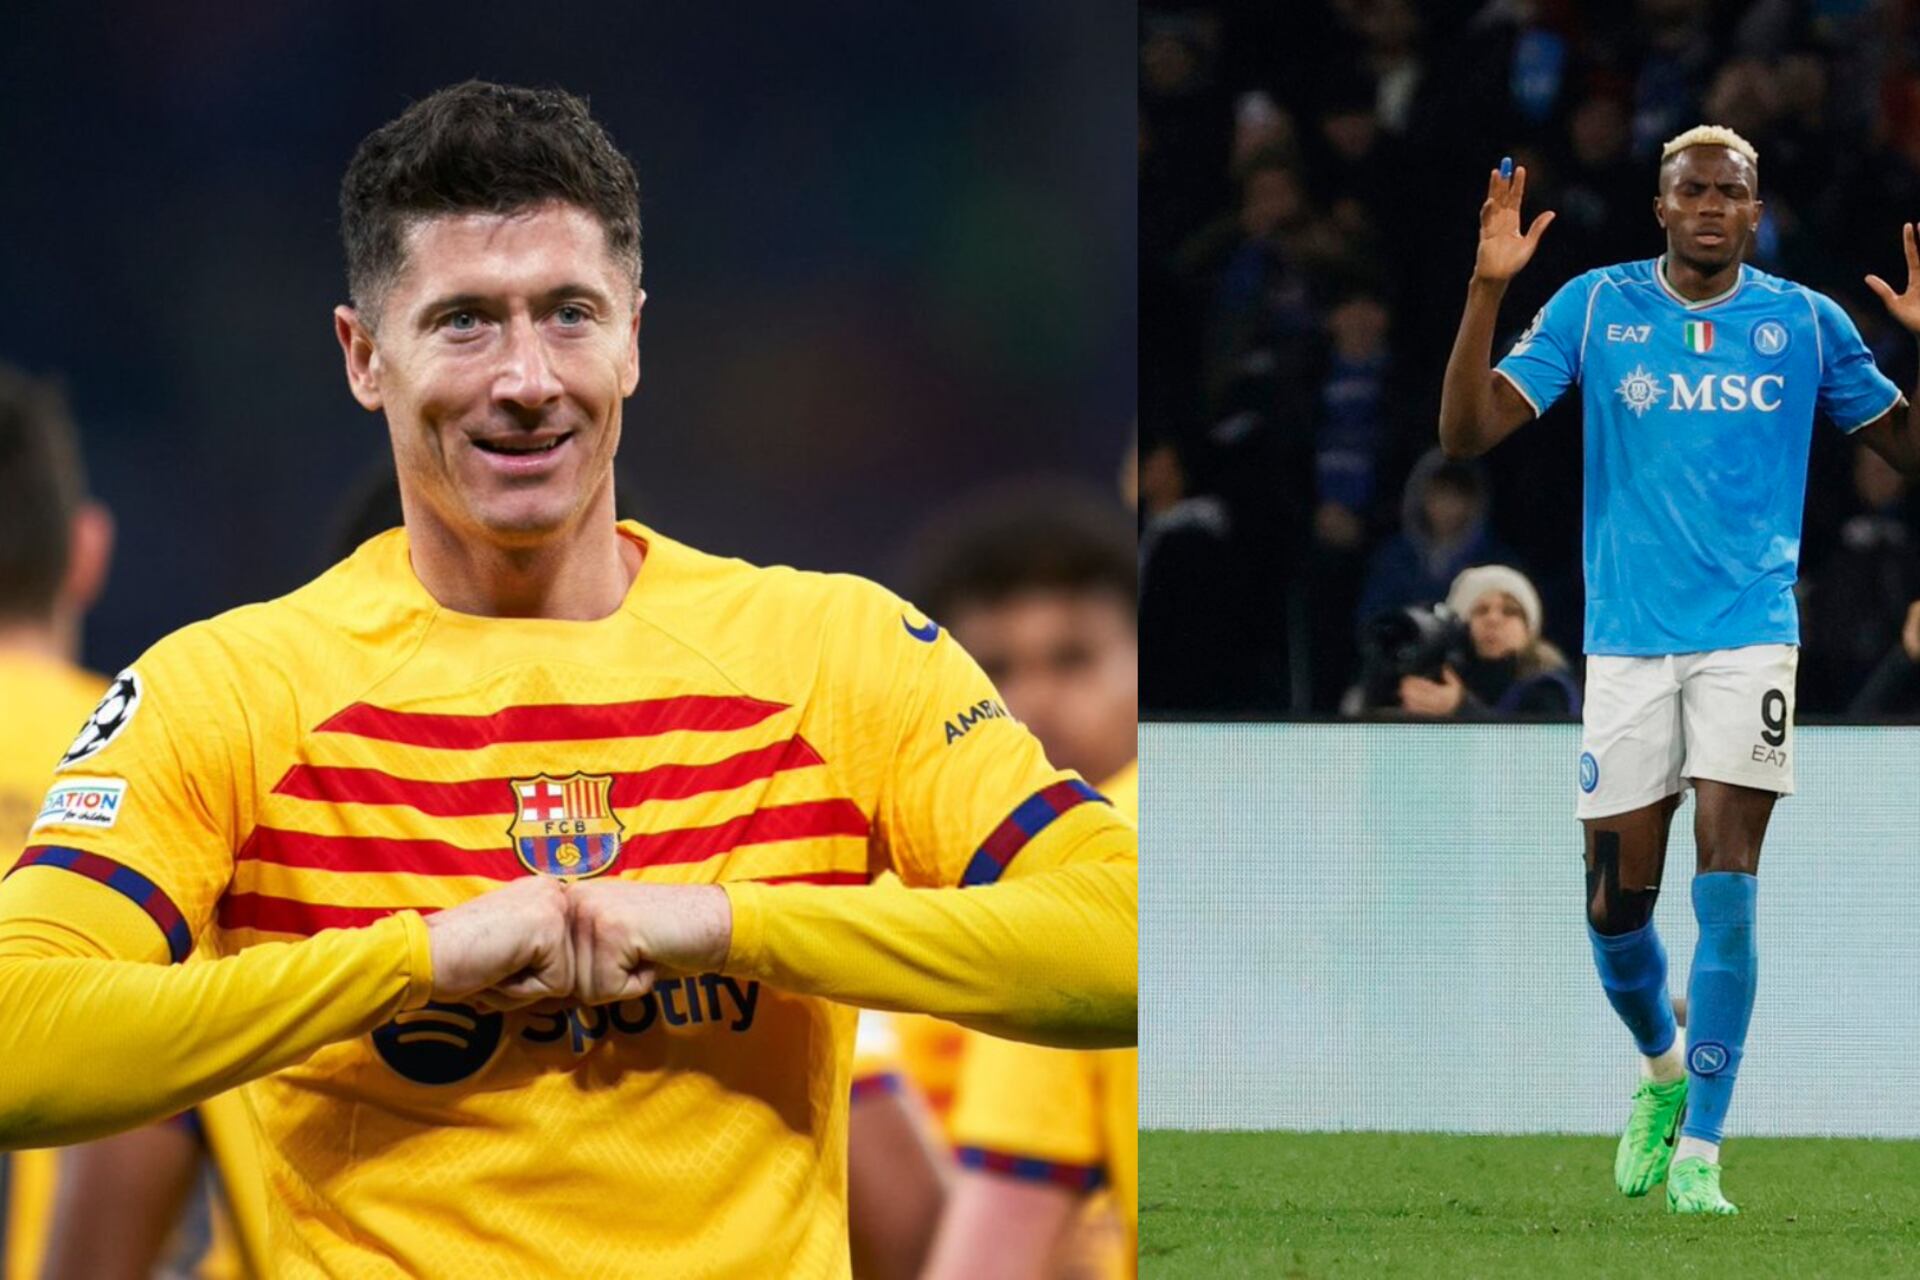 All to play for! Napoli scores late to tie 1-1 against FC Barcelona in the UCL